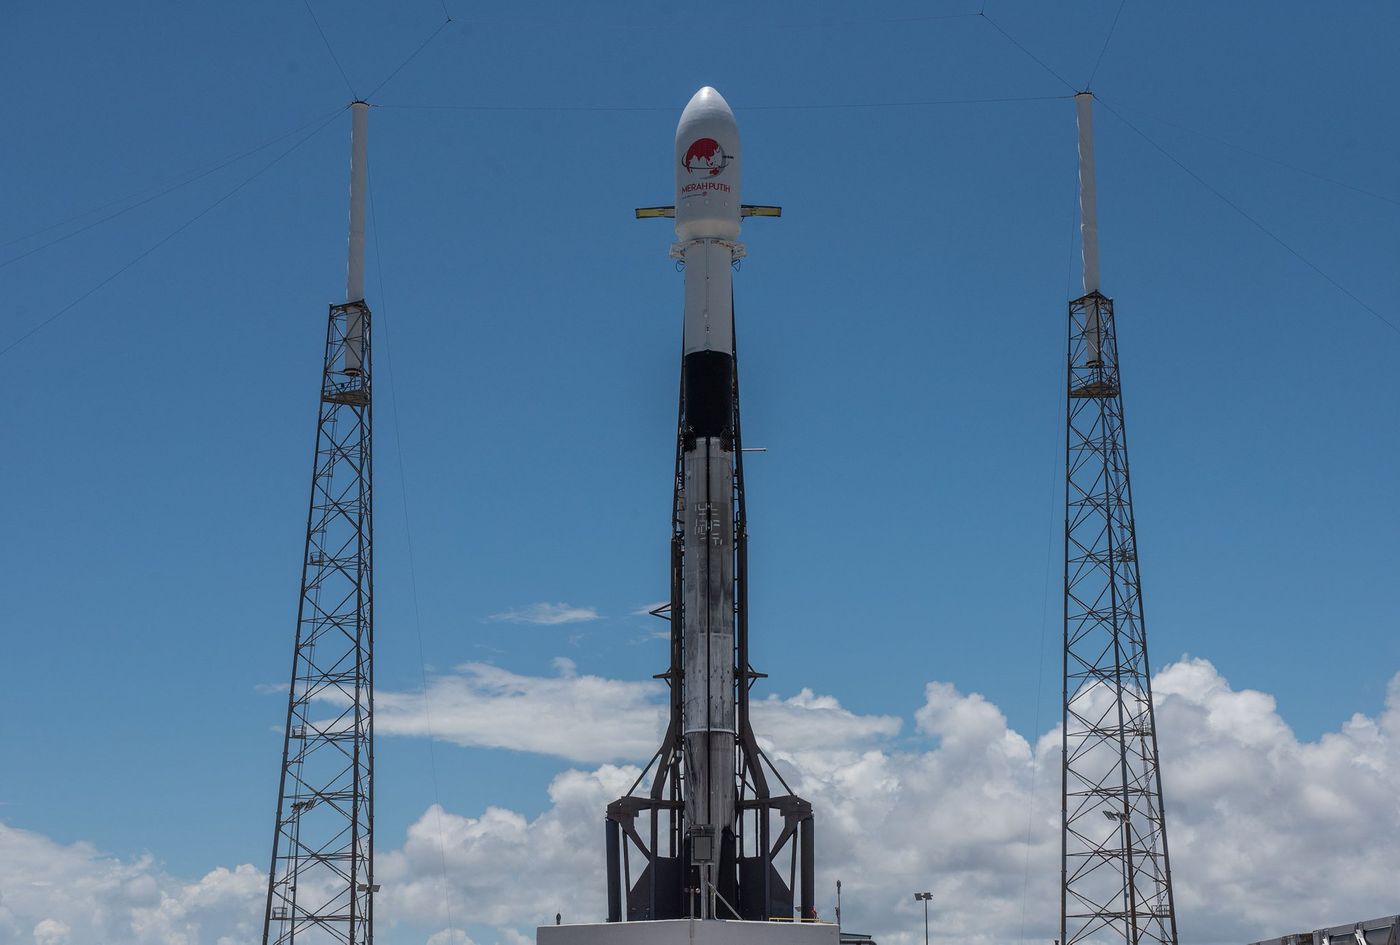 SpaceX's Falcon 9 rocket stood tall in Cape Canaveral, Florida just before launch on Tuesday.